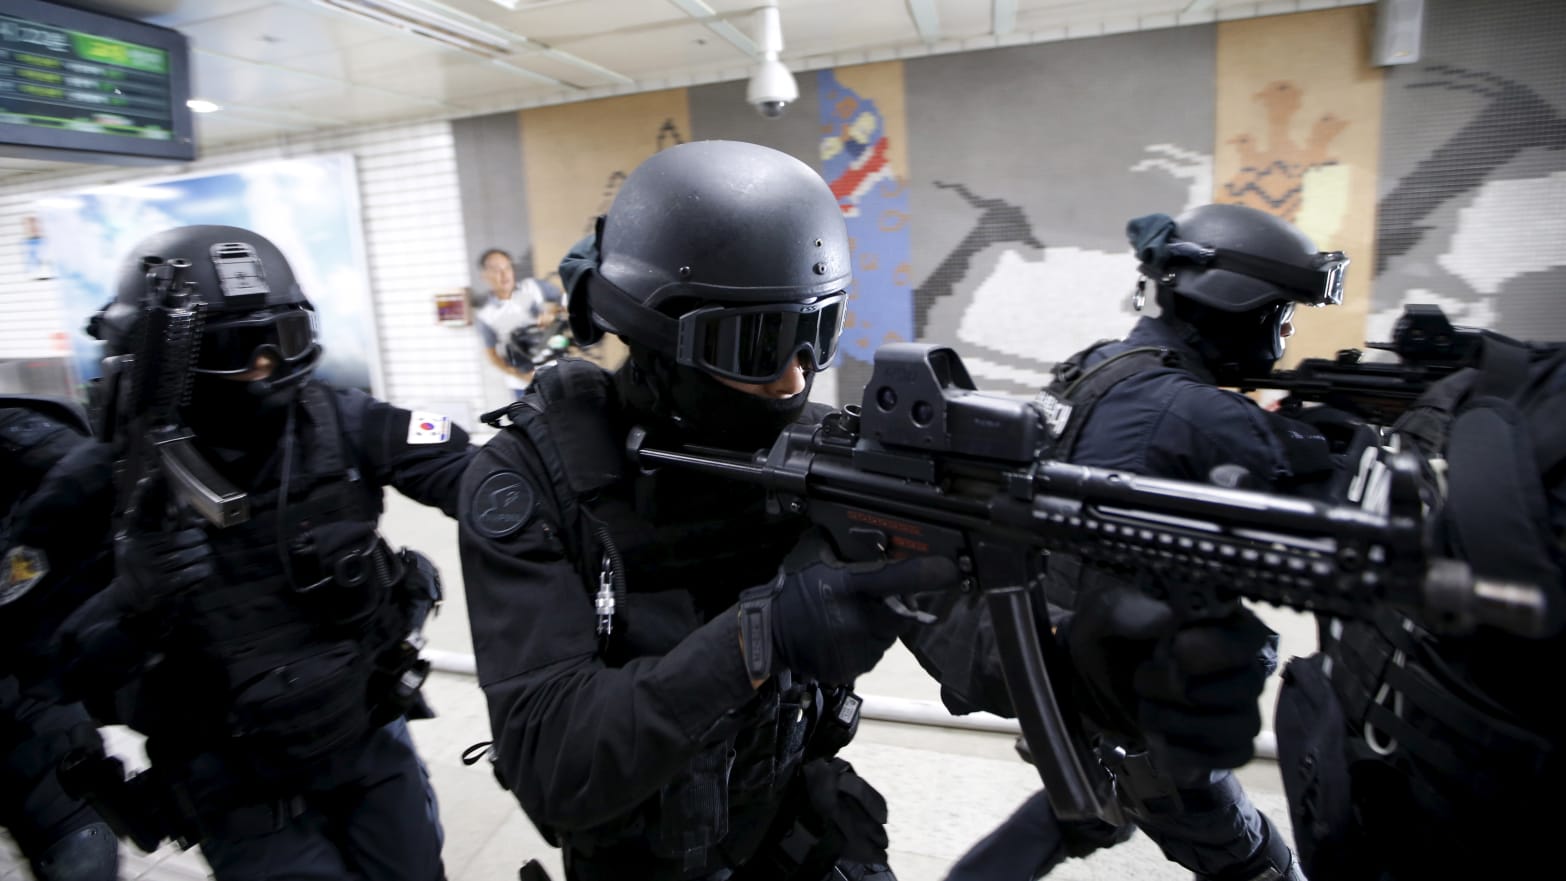 Members of the Special Weapon and Tactics (SWAT) team in 2015